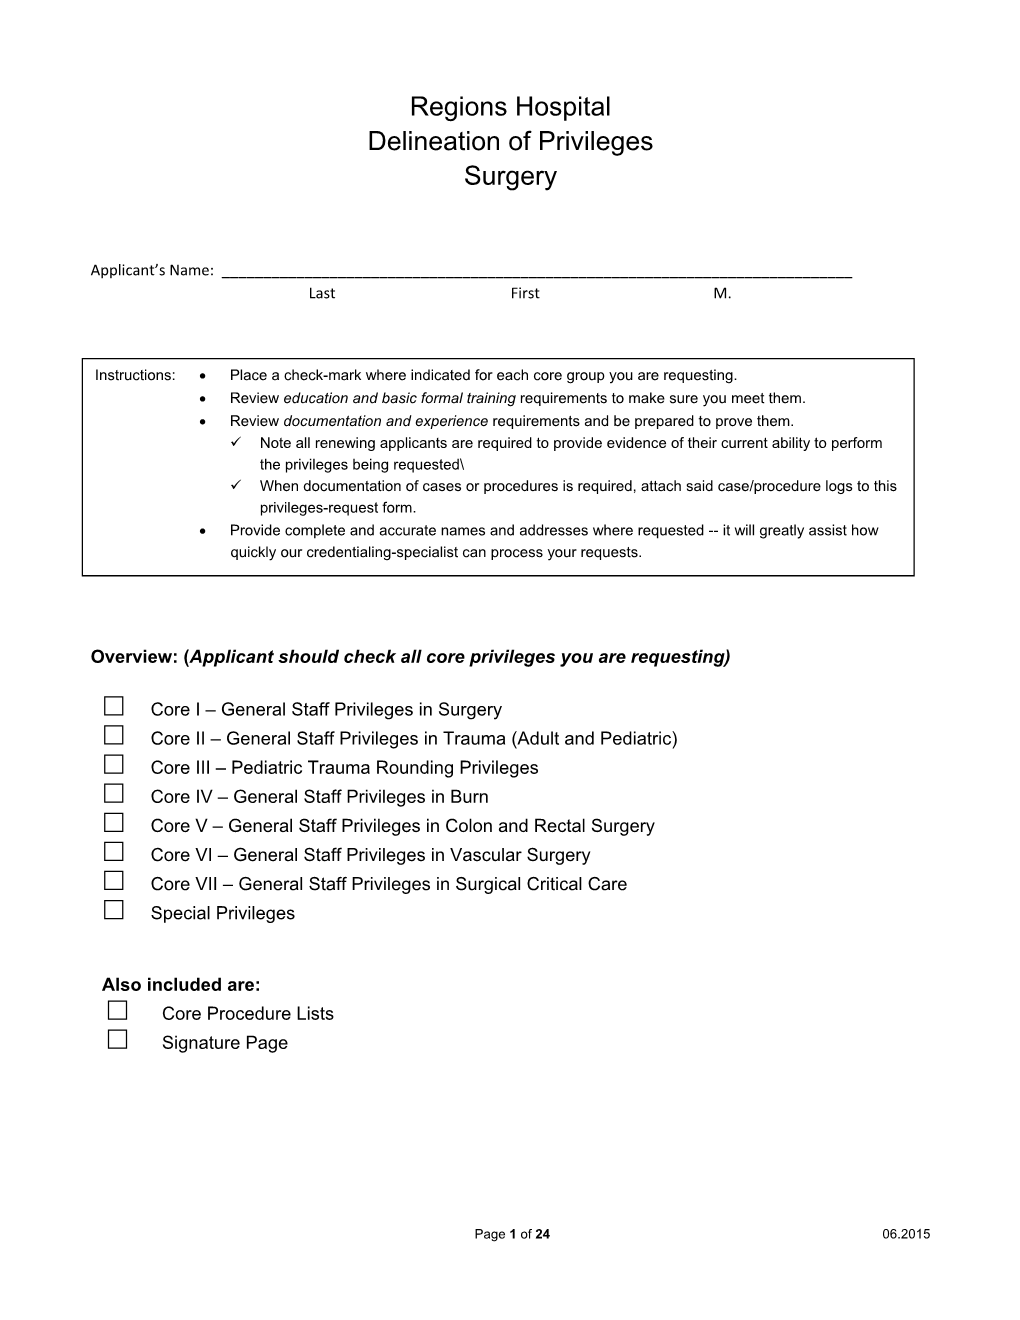 Regions Hospital Delineation of Privileges Surgery